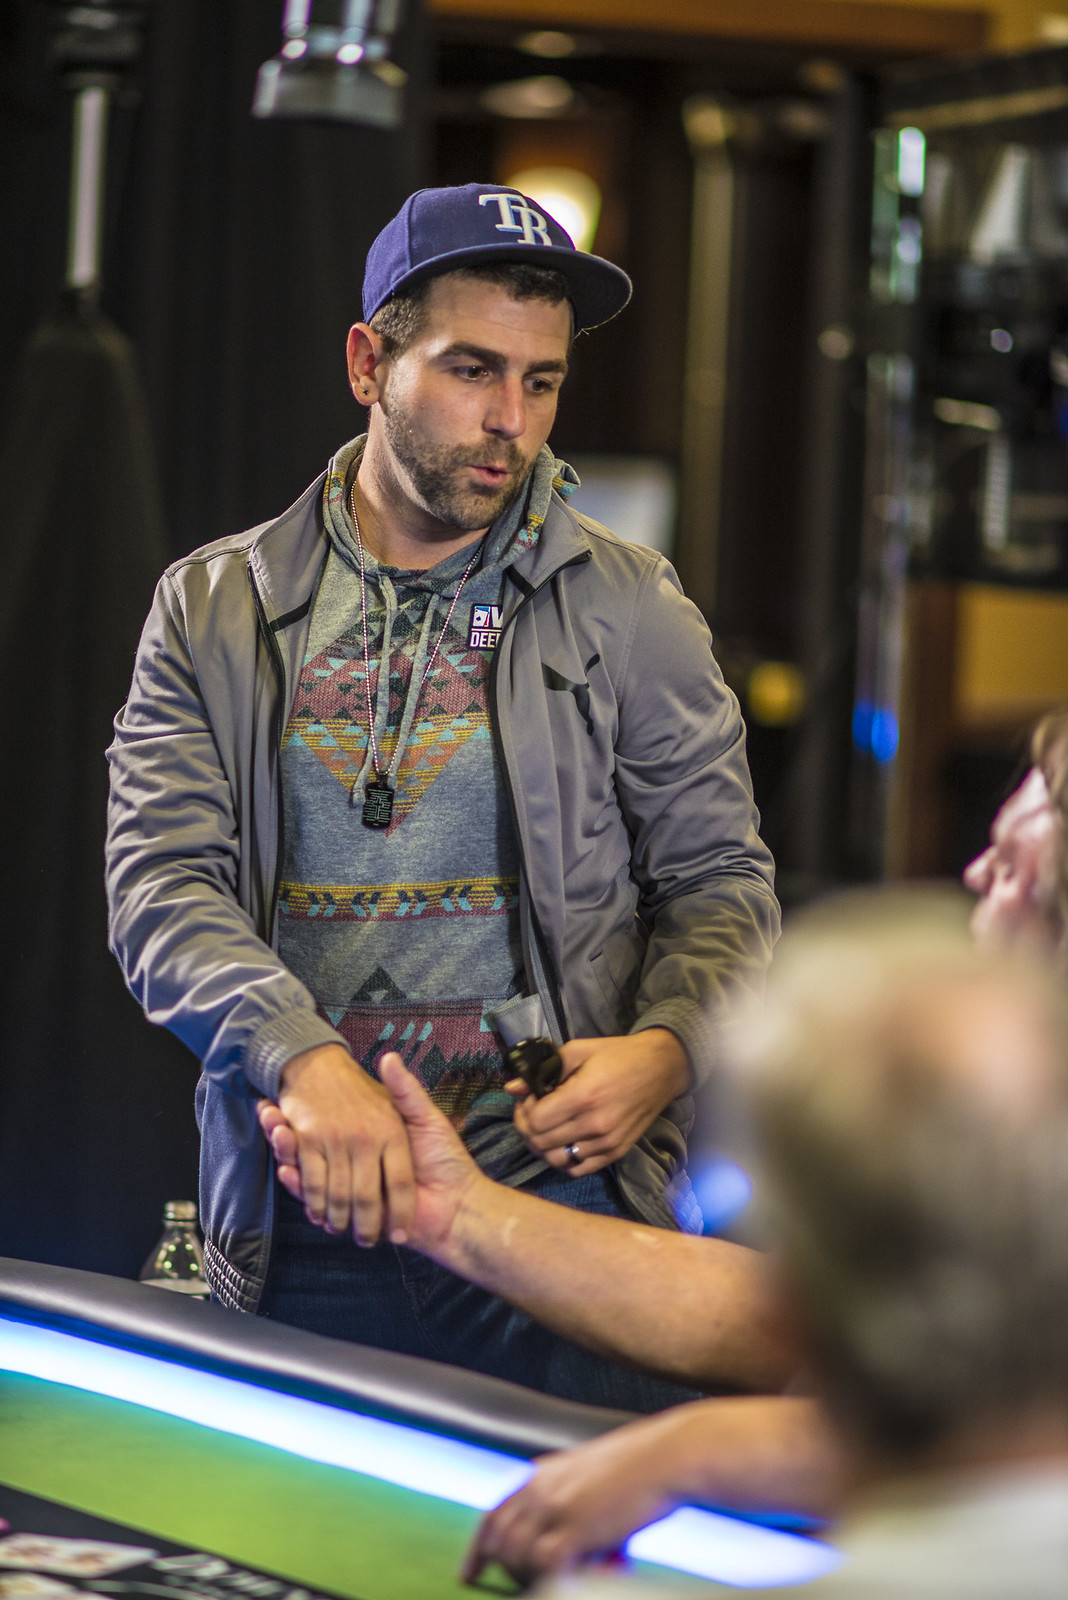 Anthony Astarita Eliminated in 7th Place